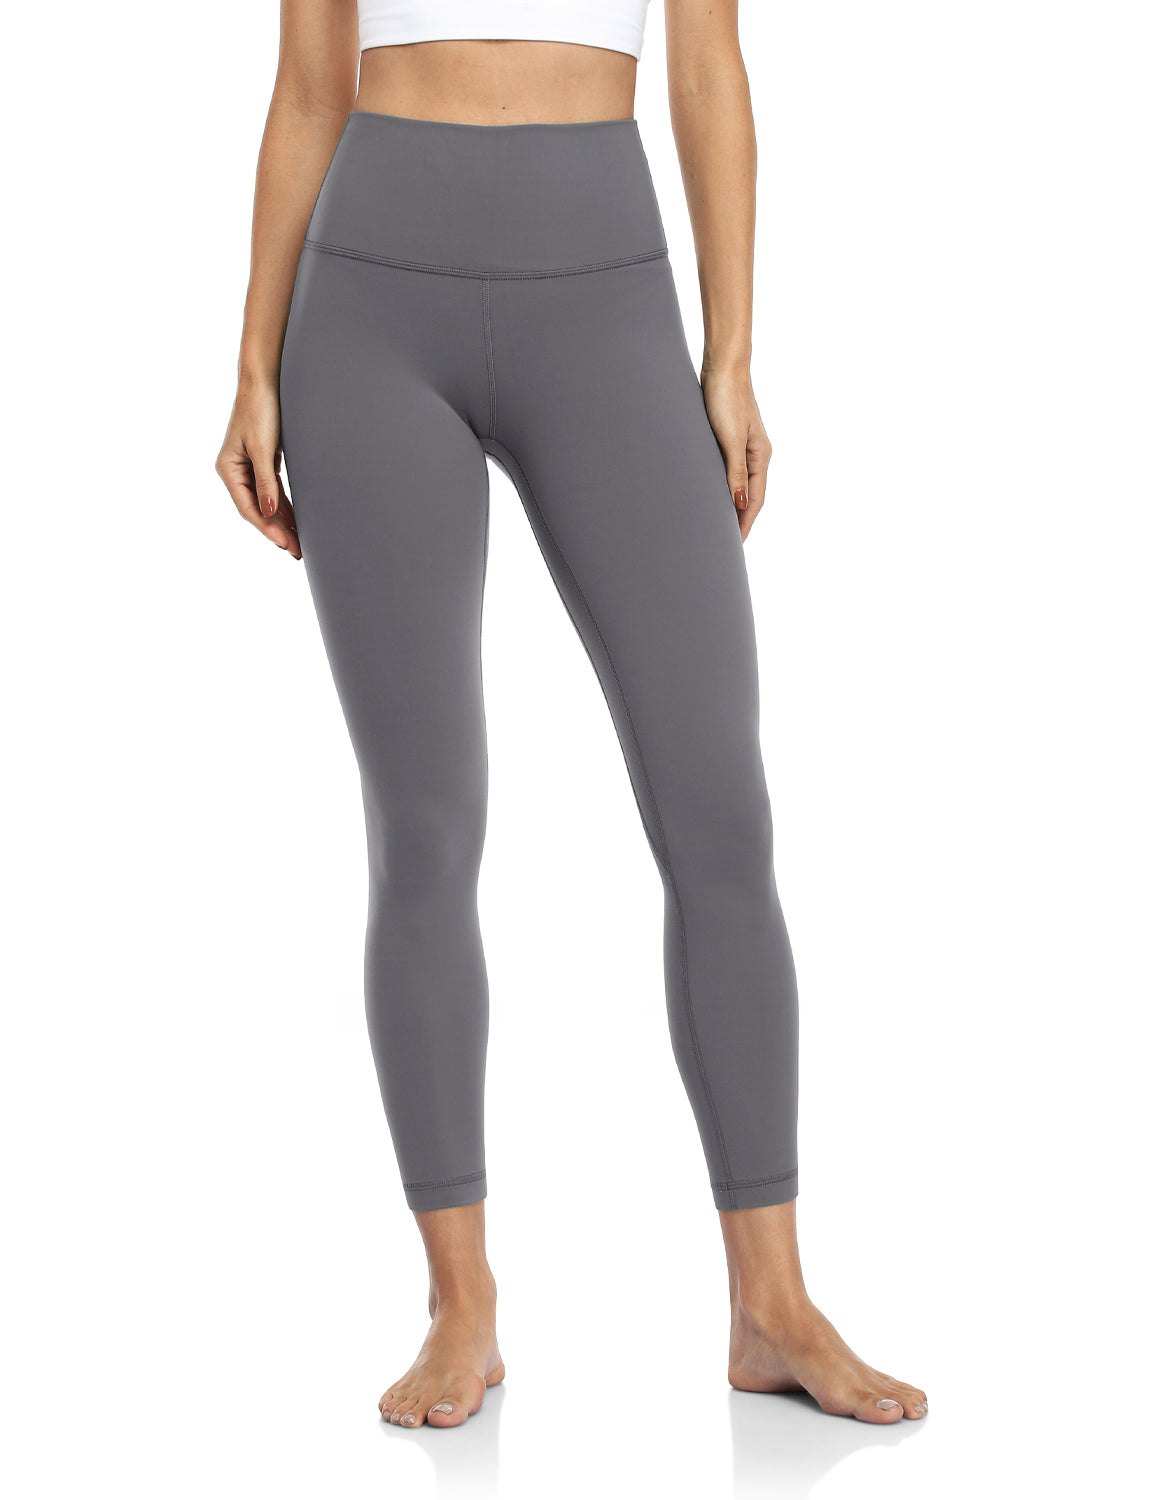 Buy HeyNuts Essential 7/8 Leggings for Women, Buttery Soft Pants Hawthorn  Athletic Yoga Pants 25'', Camo Grey_25'' Ⅱ, Small at